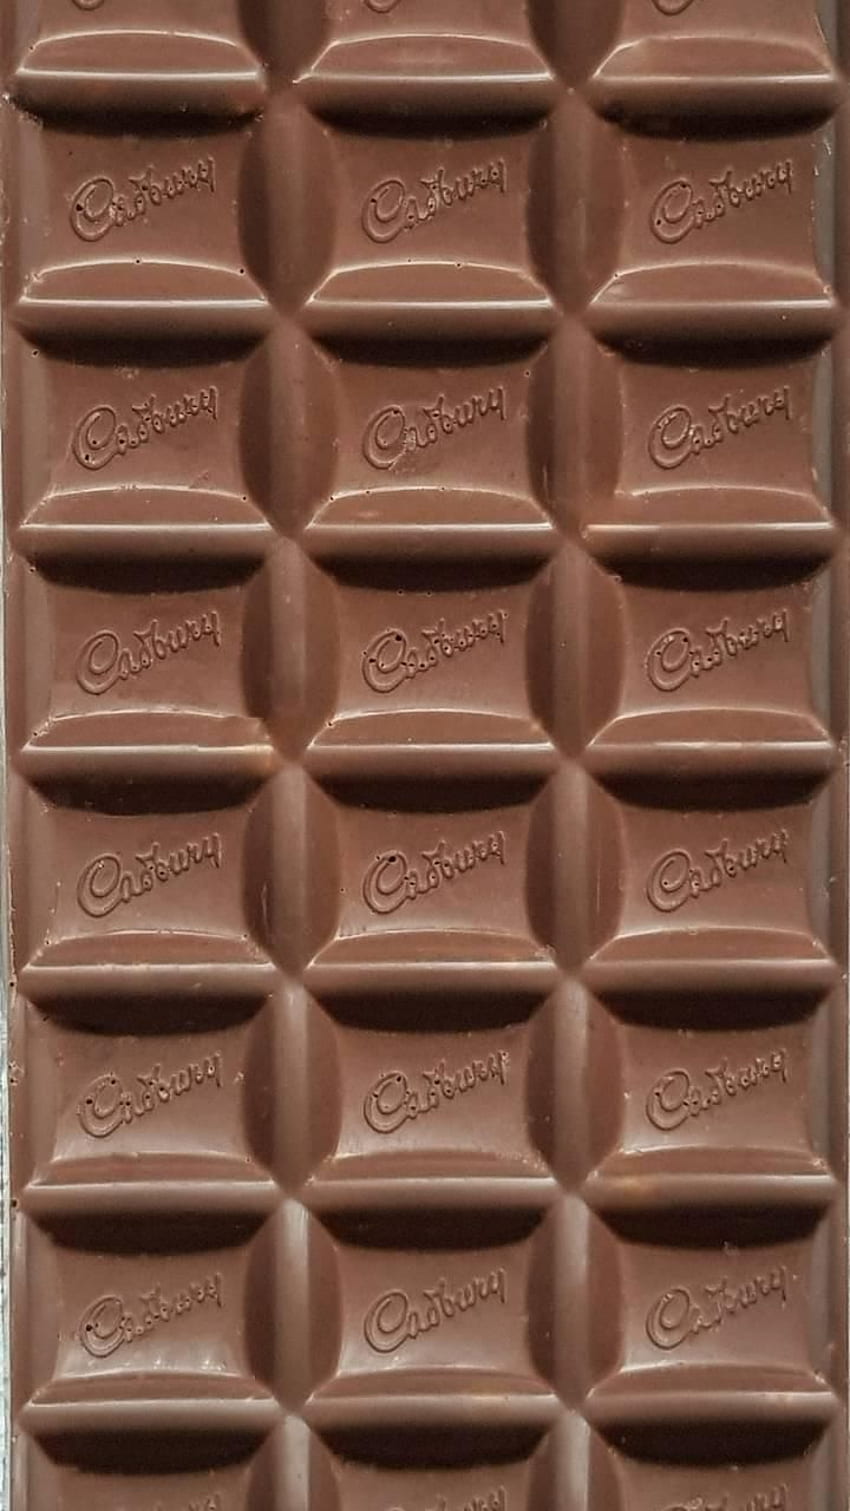 MILK CHOCOLATE now. Browse millions of popular and ringtones on Zedge and personali. Chocolate, Chocolate milk, Dairy milk chocolate HD phone wallpaper